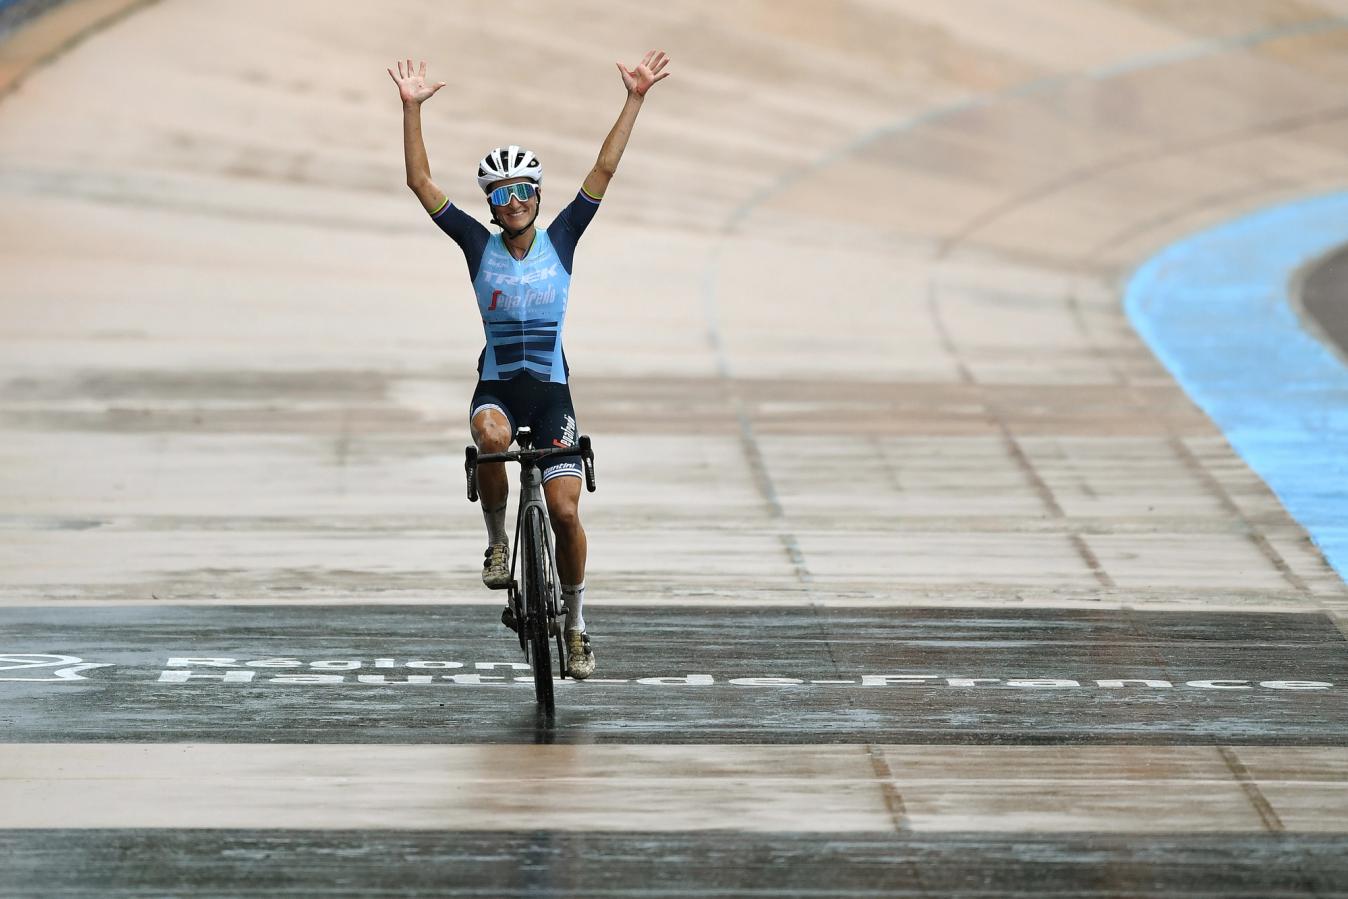 Lizzie Deignan crosses the line on the iconic Roubaix Velodrome and writes her name into the race’s history books as its first ever female winner.